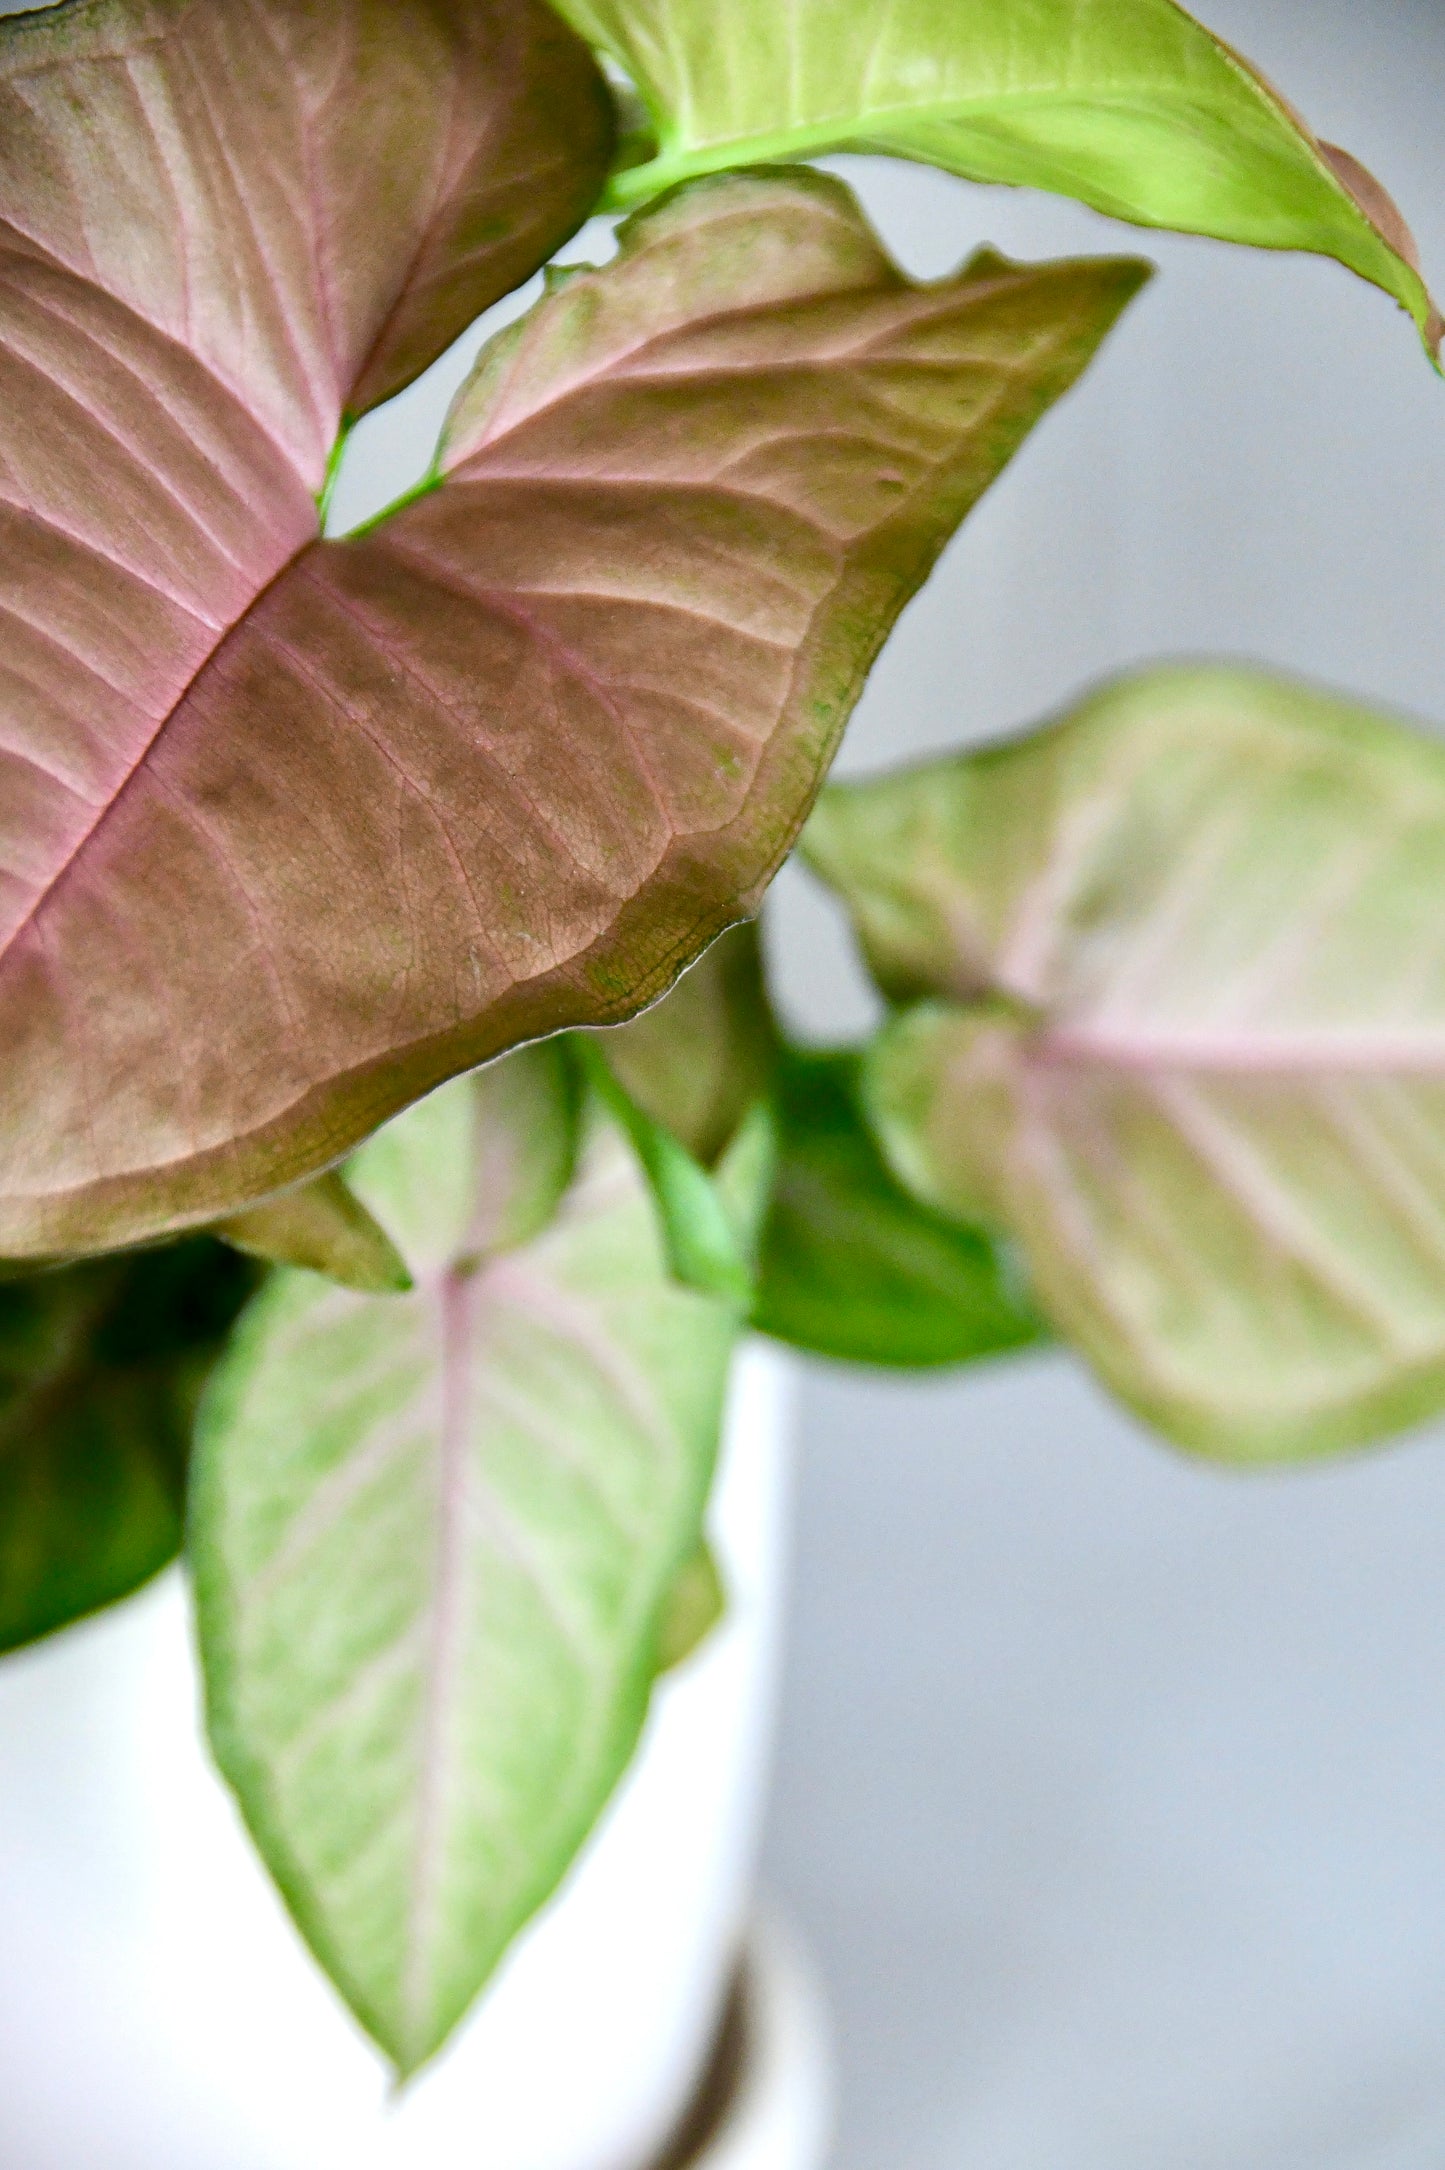 4" Plants with Pink Syngonium